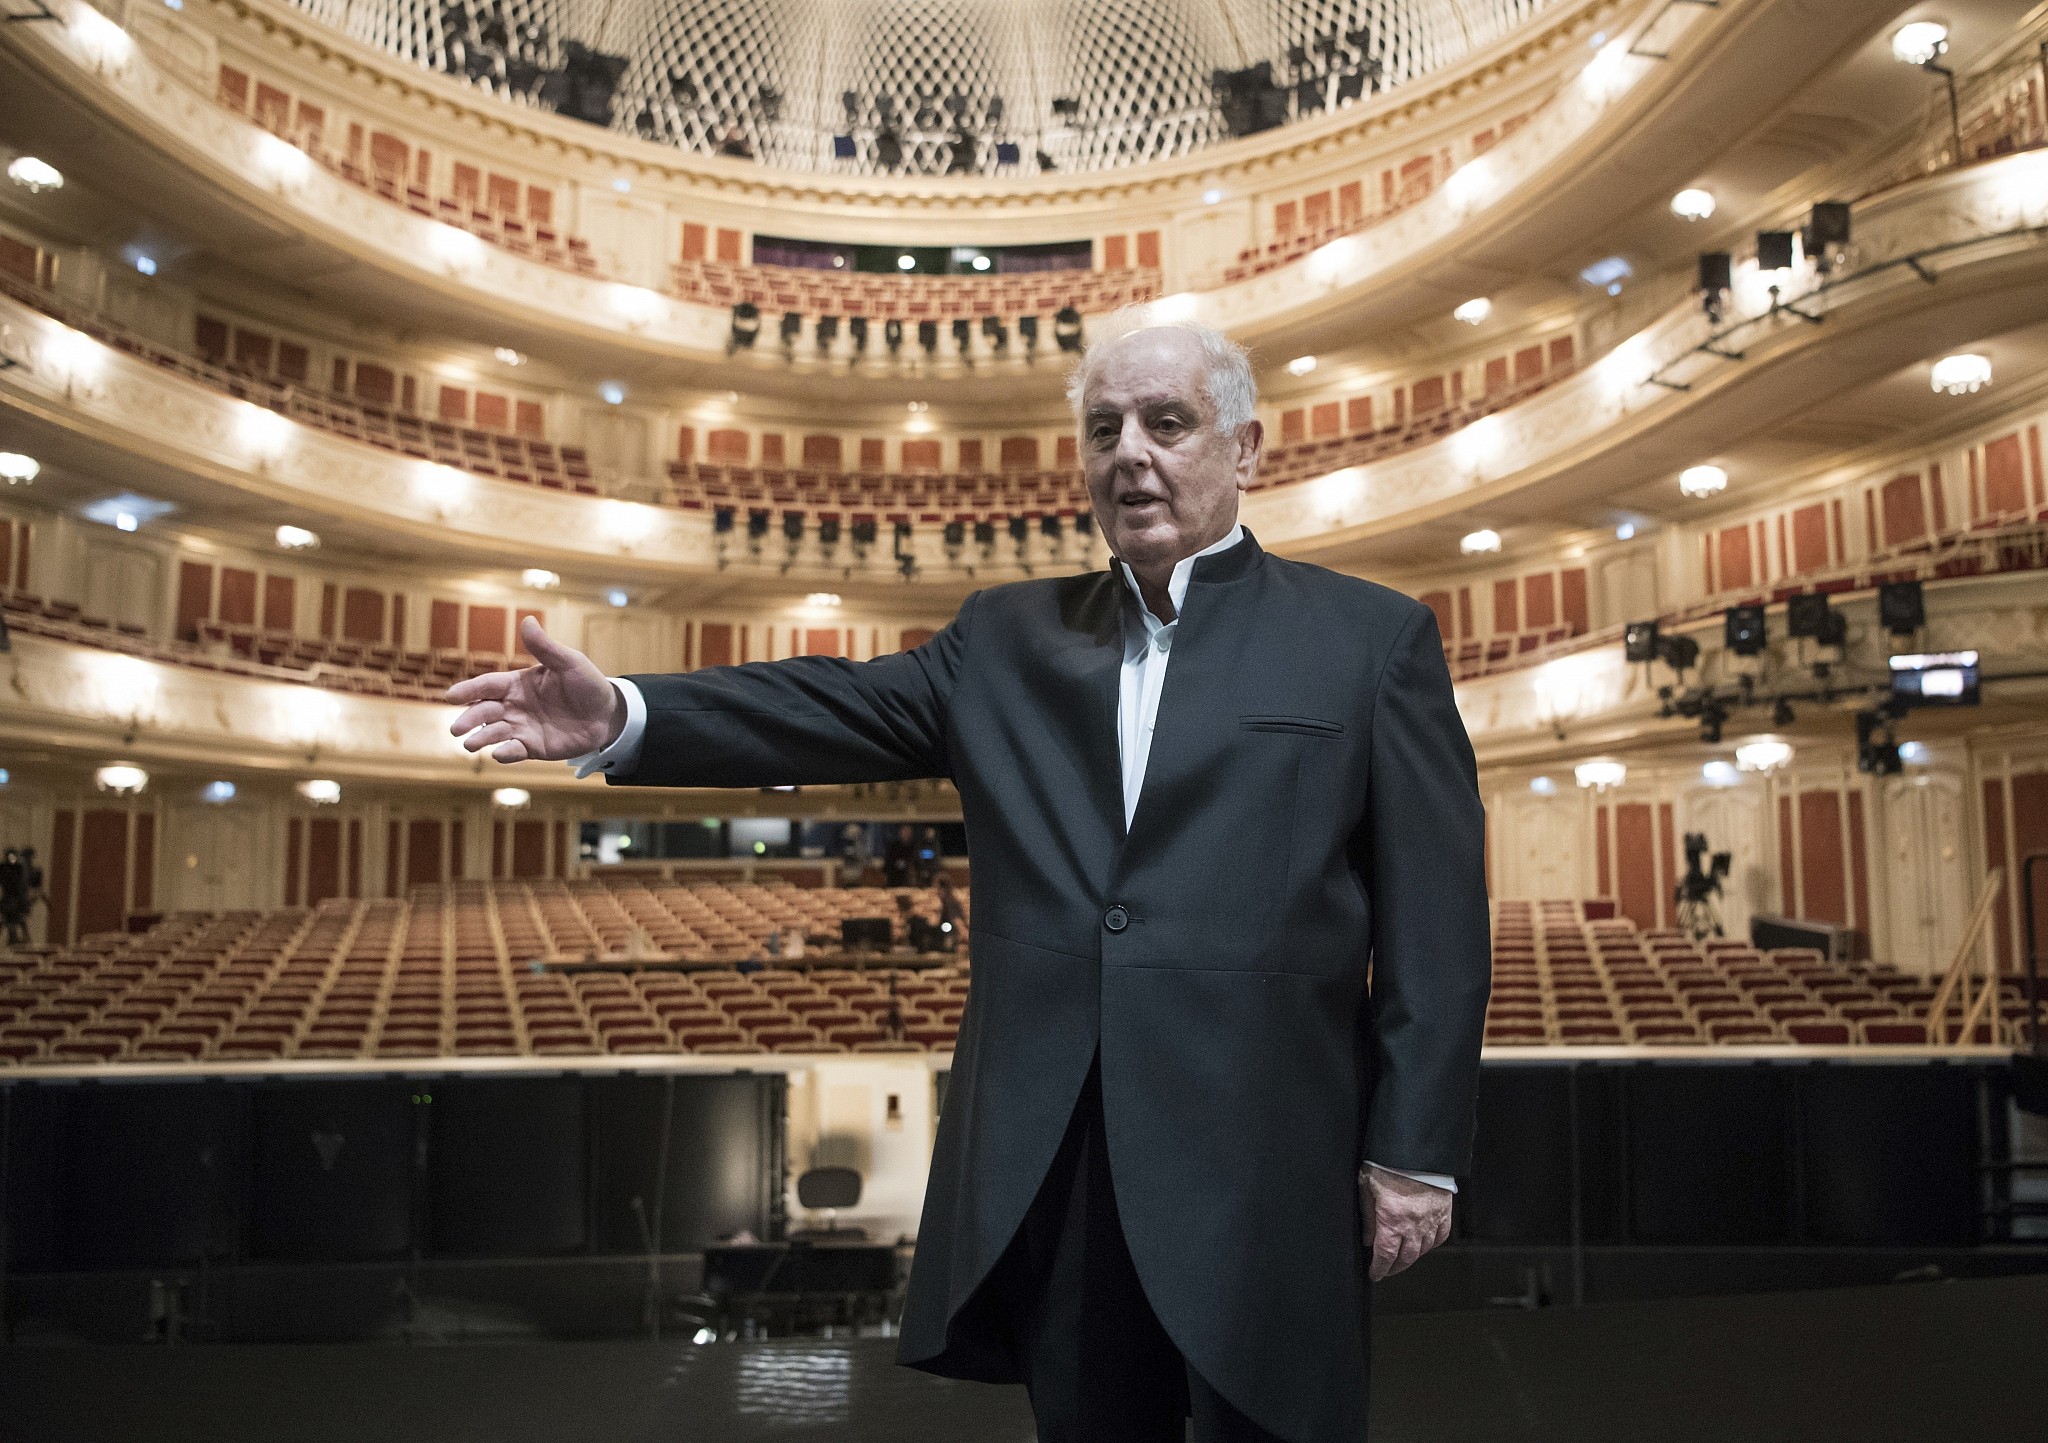 Star conductor Barenboim hits back after criticisms | The Times of ...